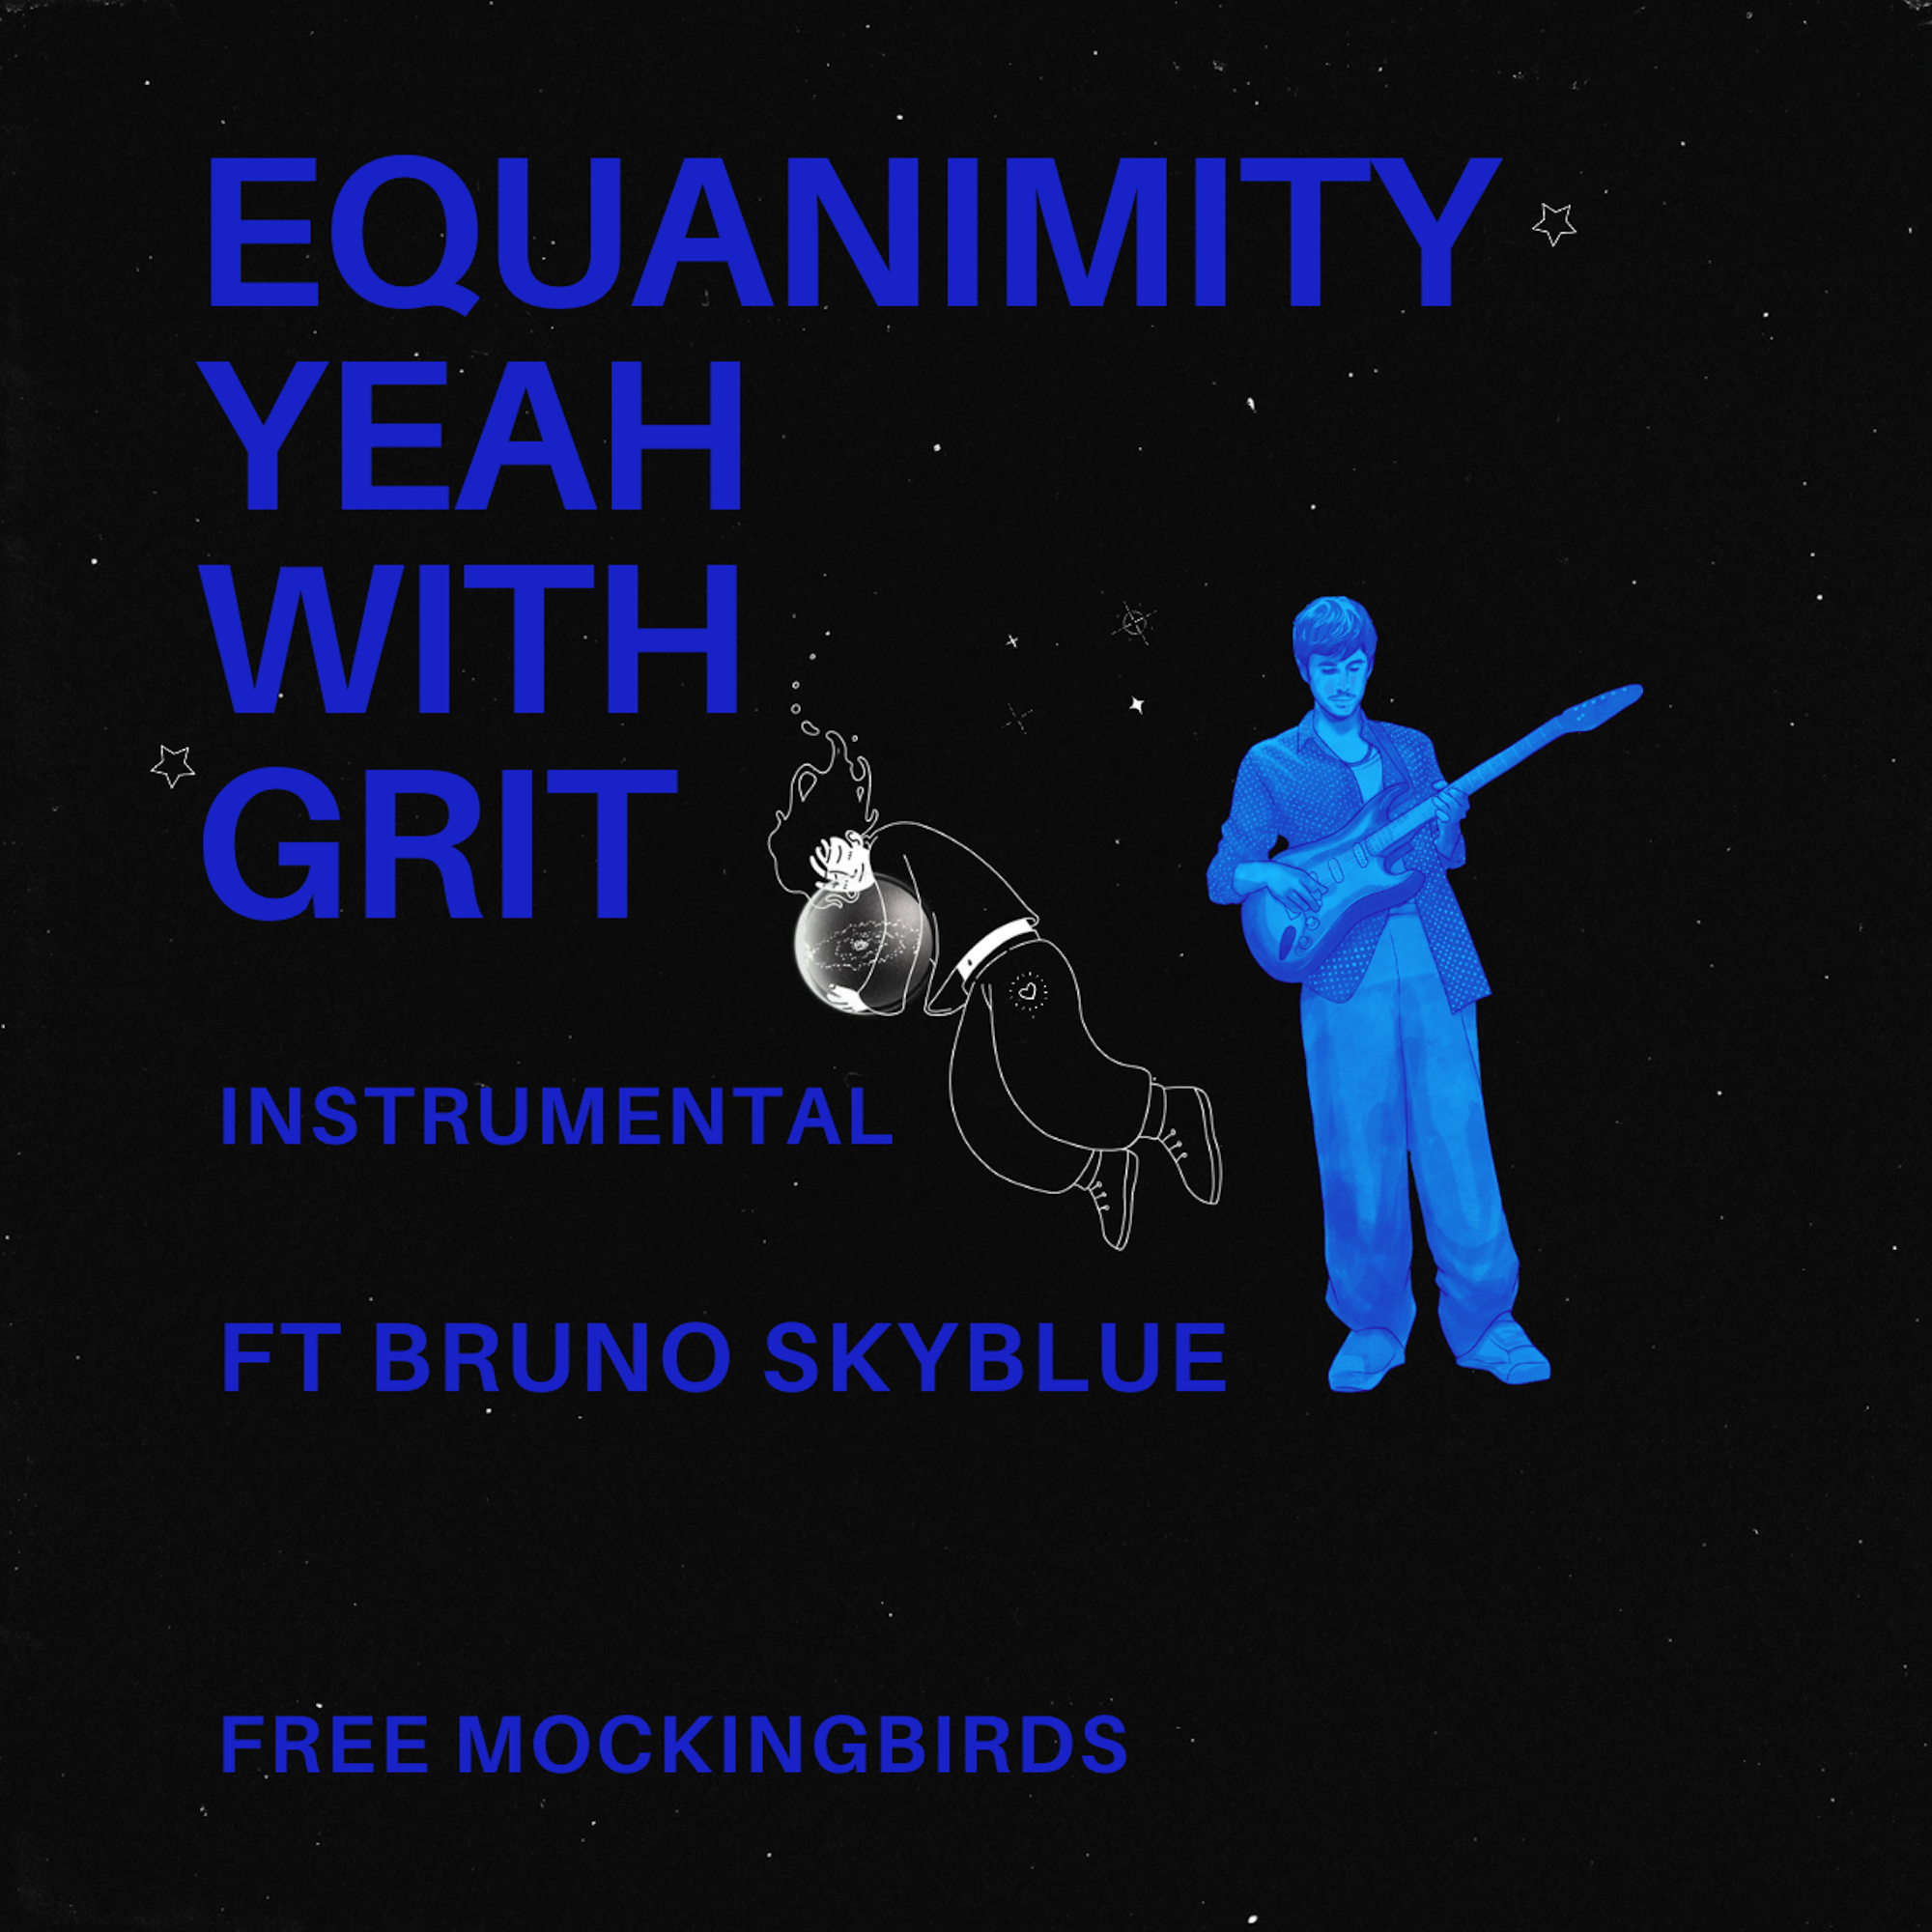 Meet the New Blues-Rock Icons: Free Mockingbirds Soar with ‘Equanimity Yeah with Grit’ on the playlist